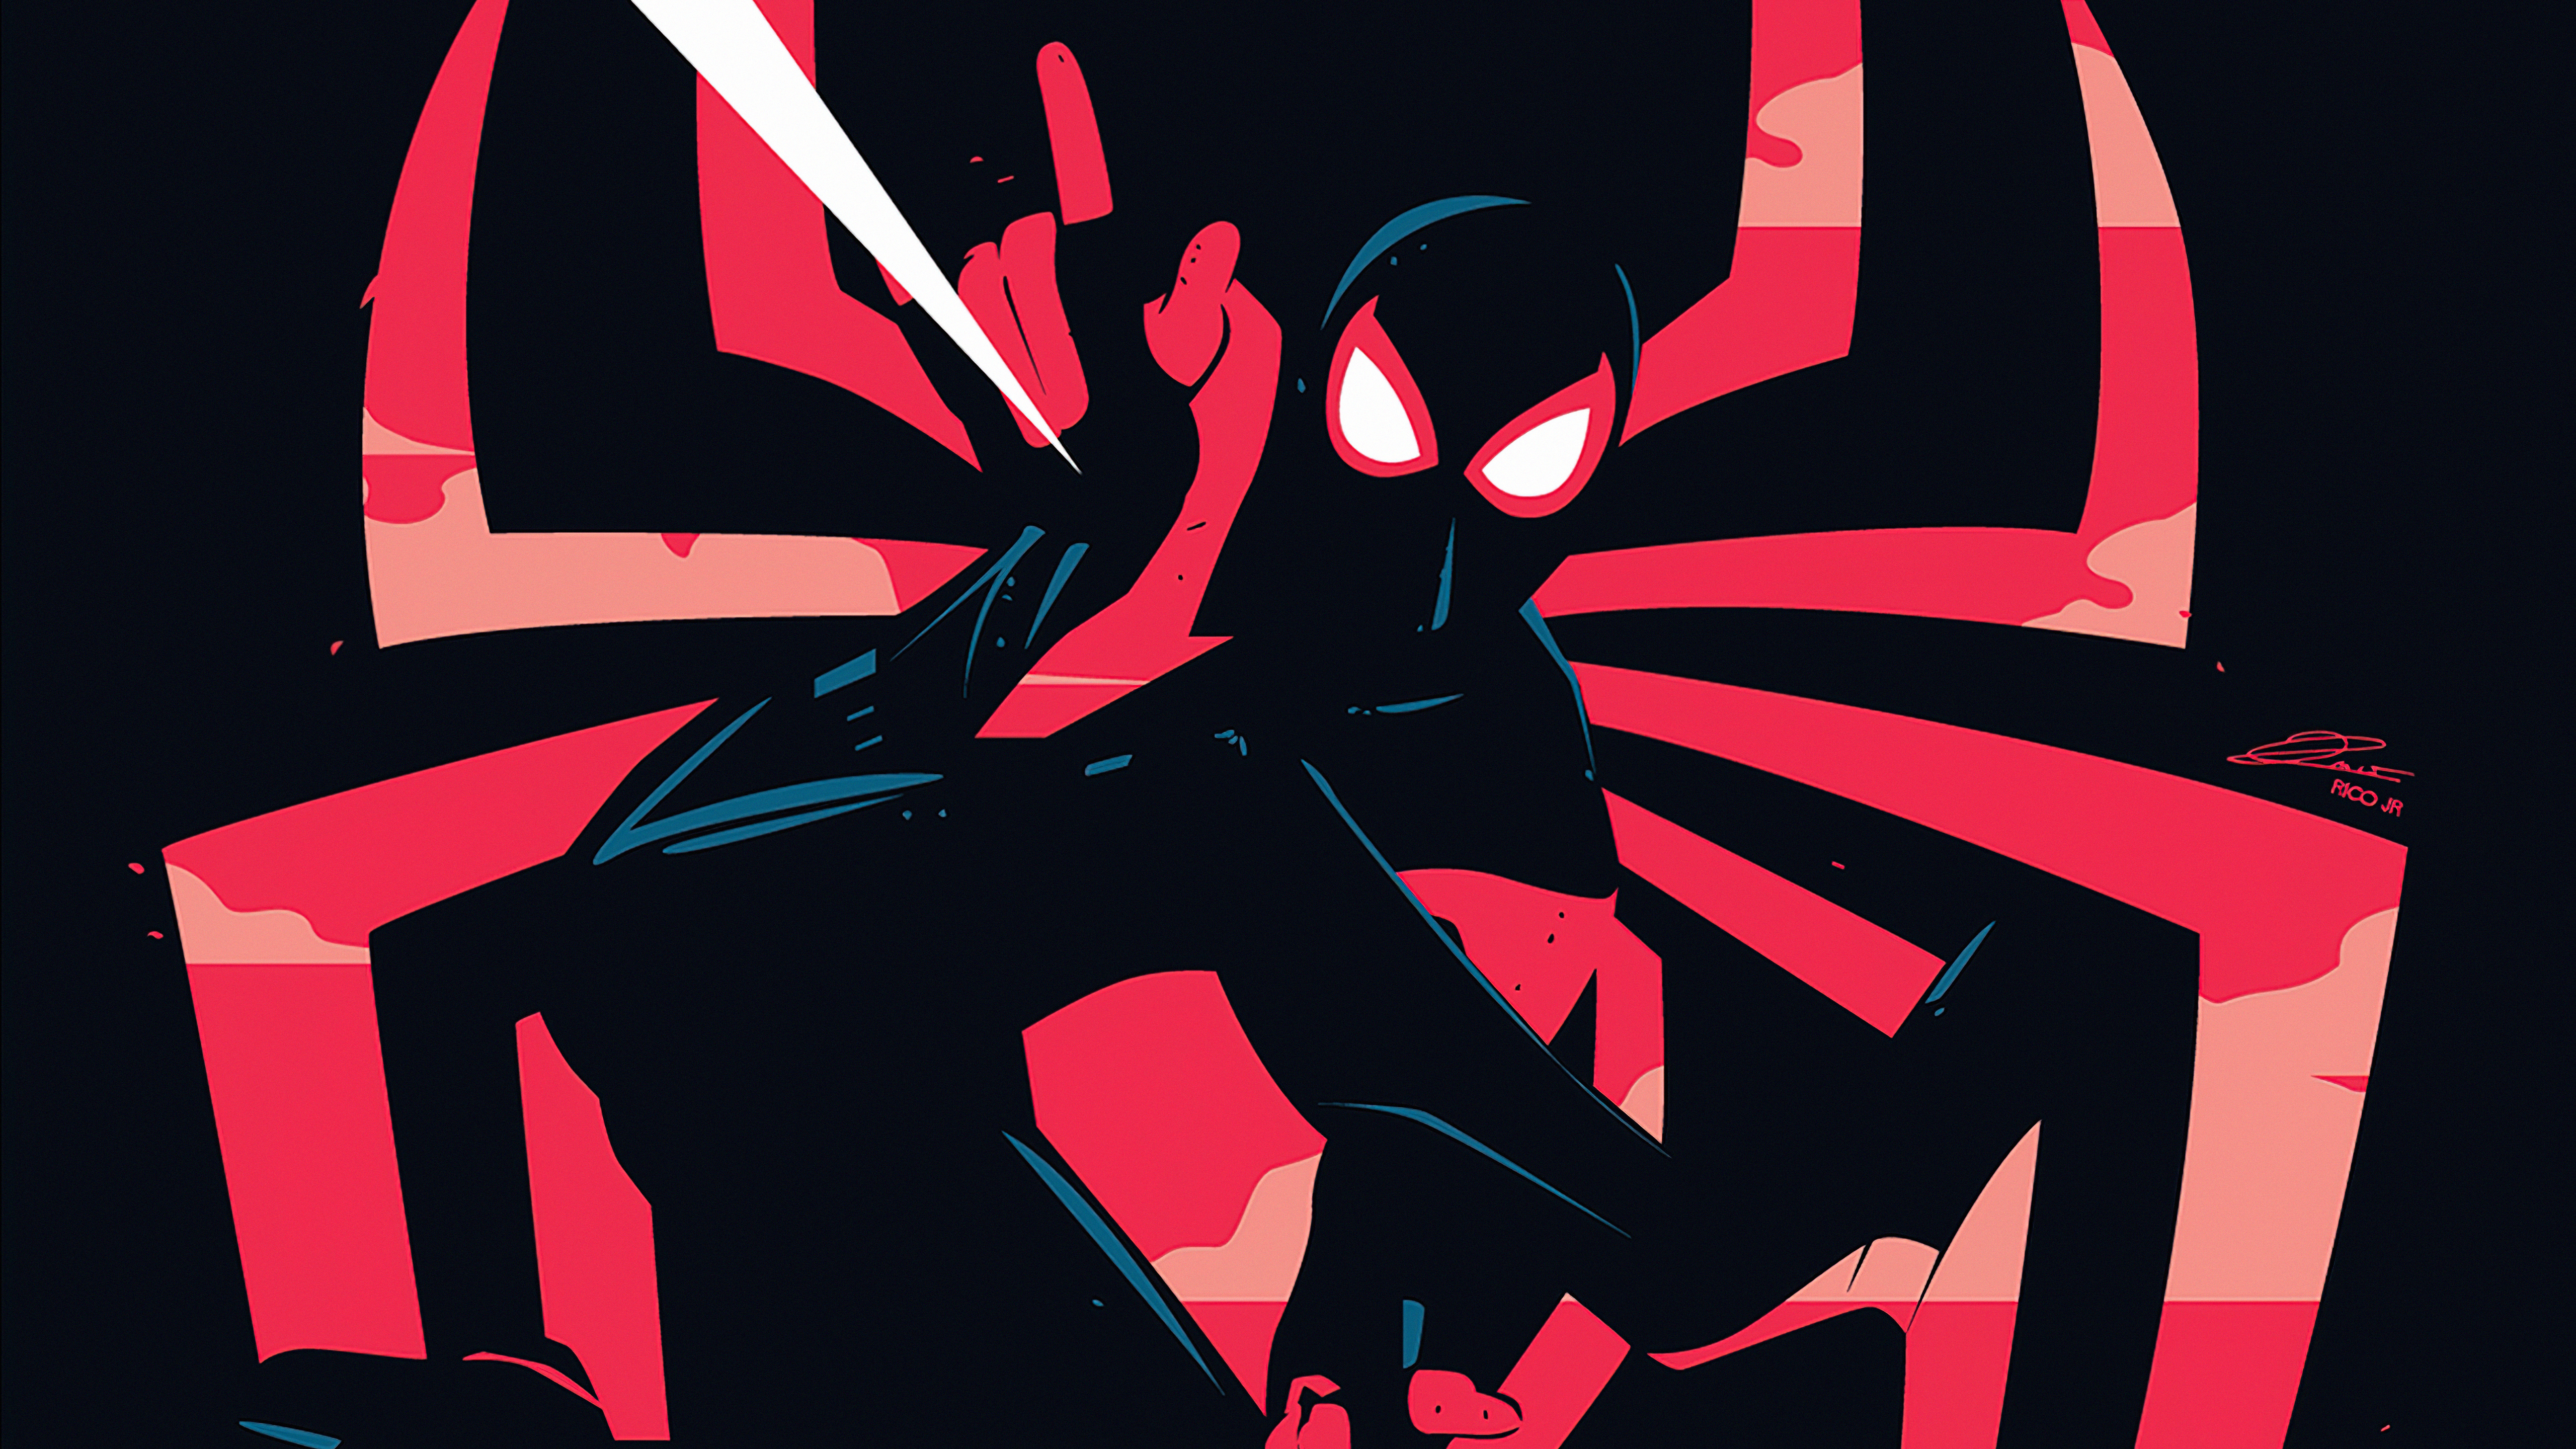 Marvel's Spider-Man Miles Morales Gaming Wallpapers